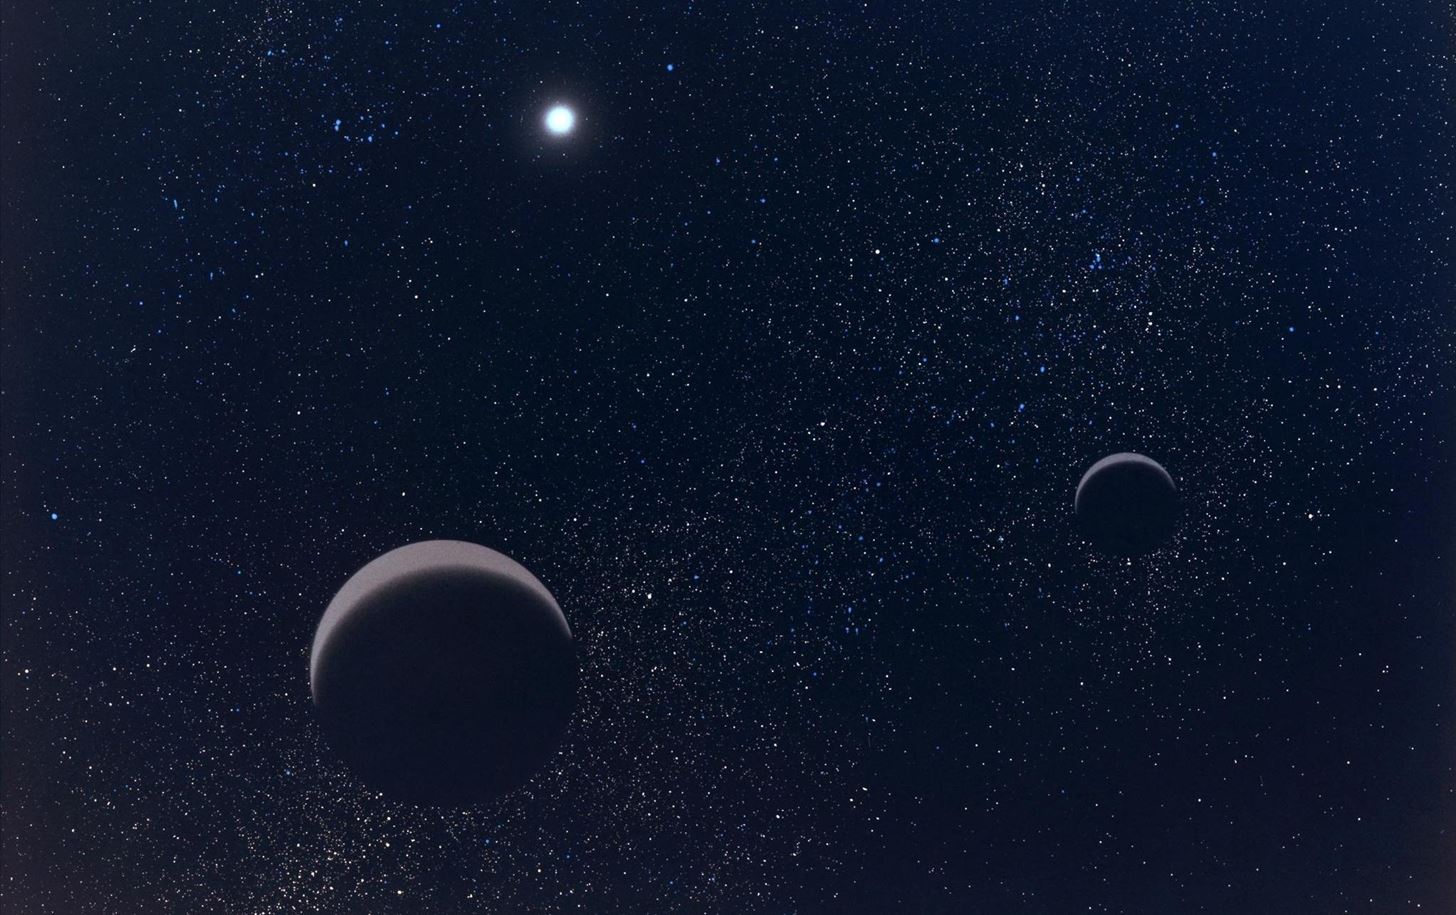 SETI Needs Your Help Renaming Pluto's Newly Found P4 and P5 Moons